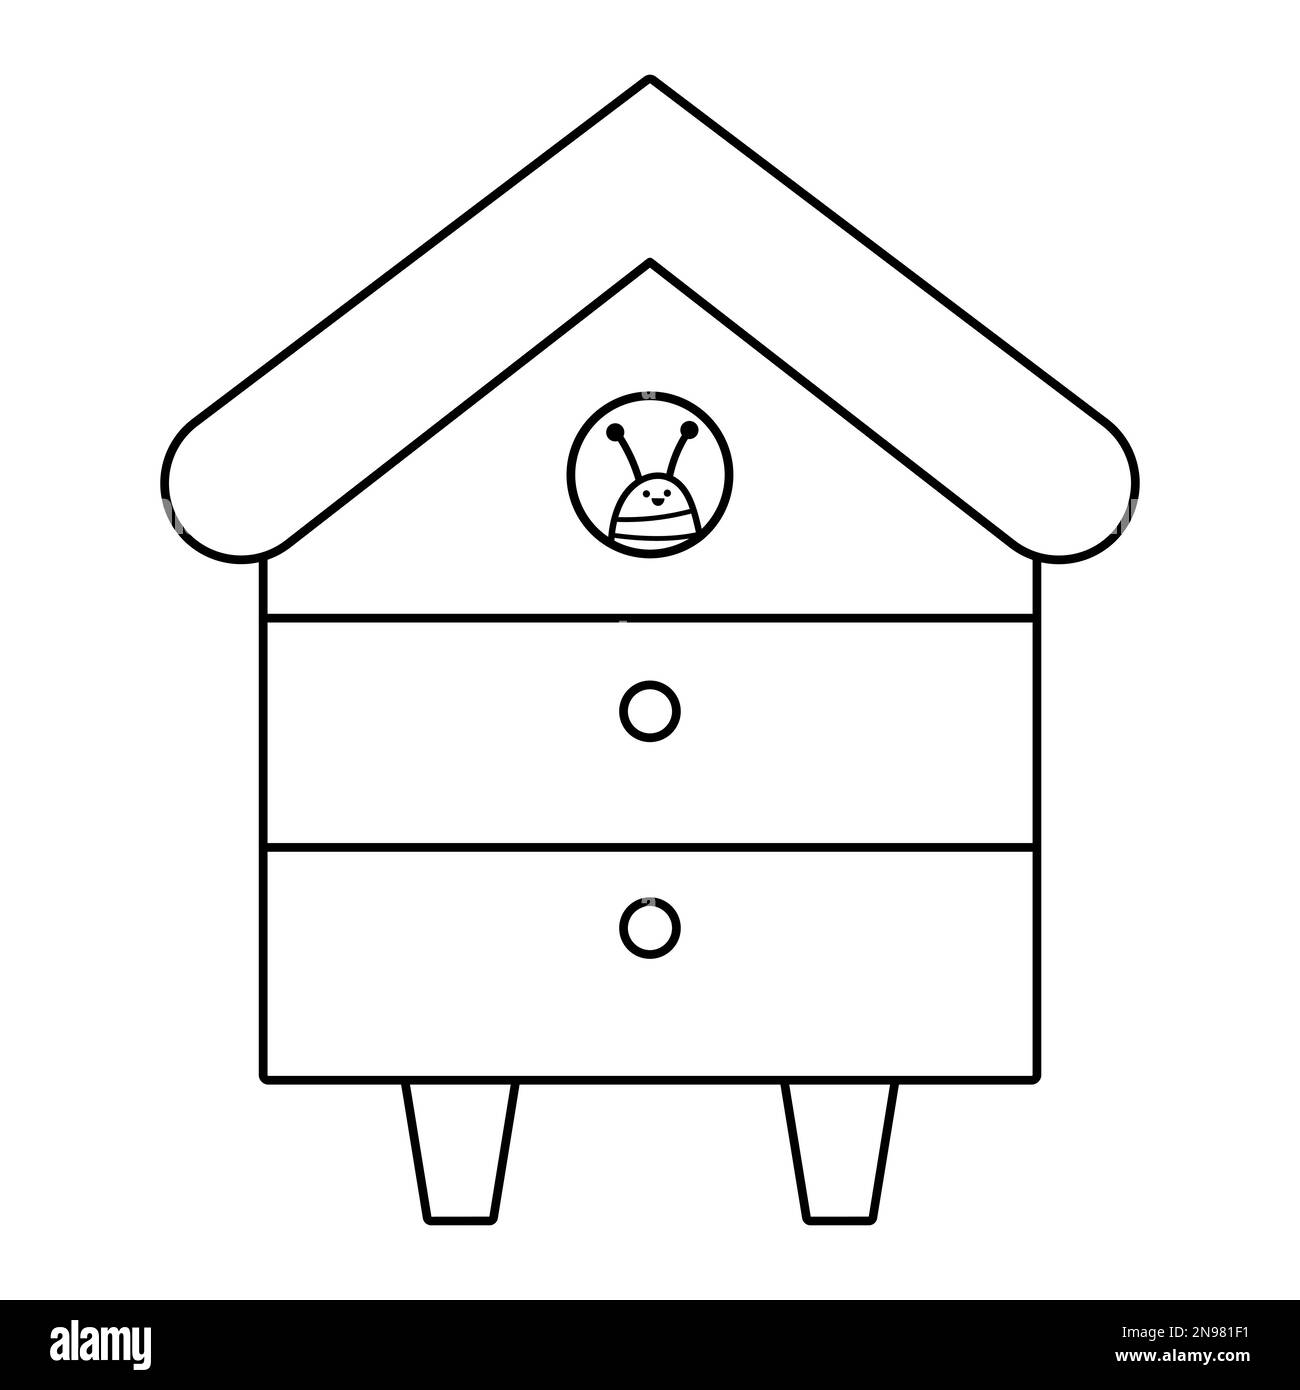 Vector black and white beehive line icon. Bee house with smiling insect isolated on white background. Beekeeping illustration or coloring page. Honey Stock Vector